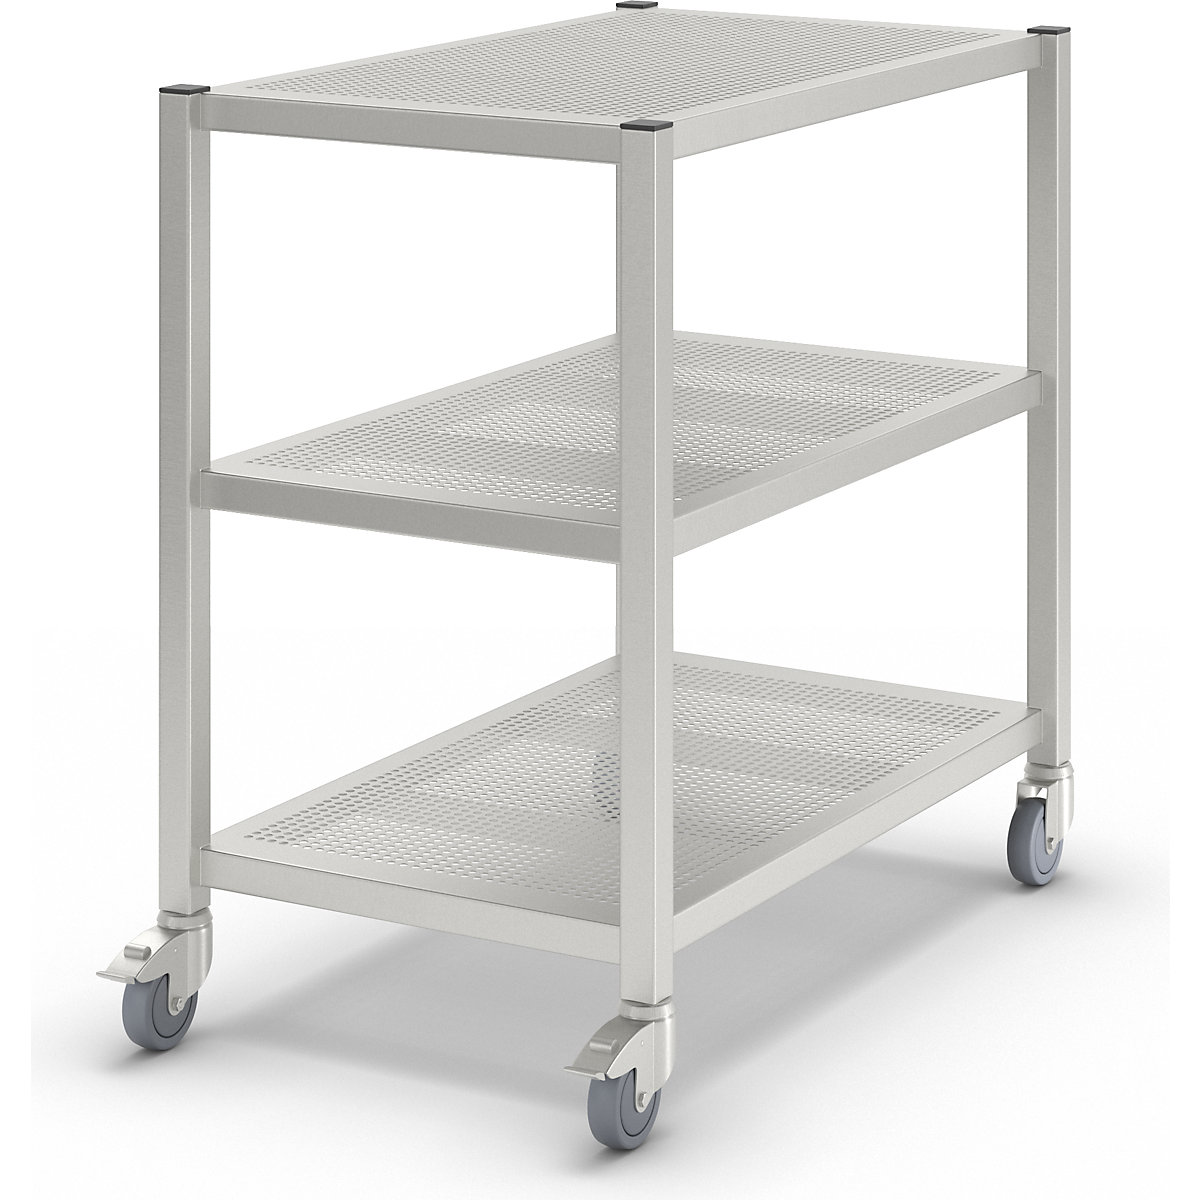 Mobile cleanroom table, made of stainless steel, 3 shelves, length 1000 mm-5